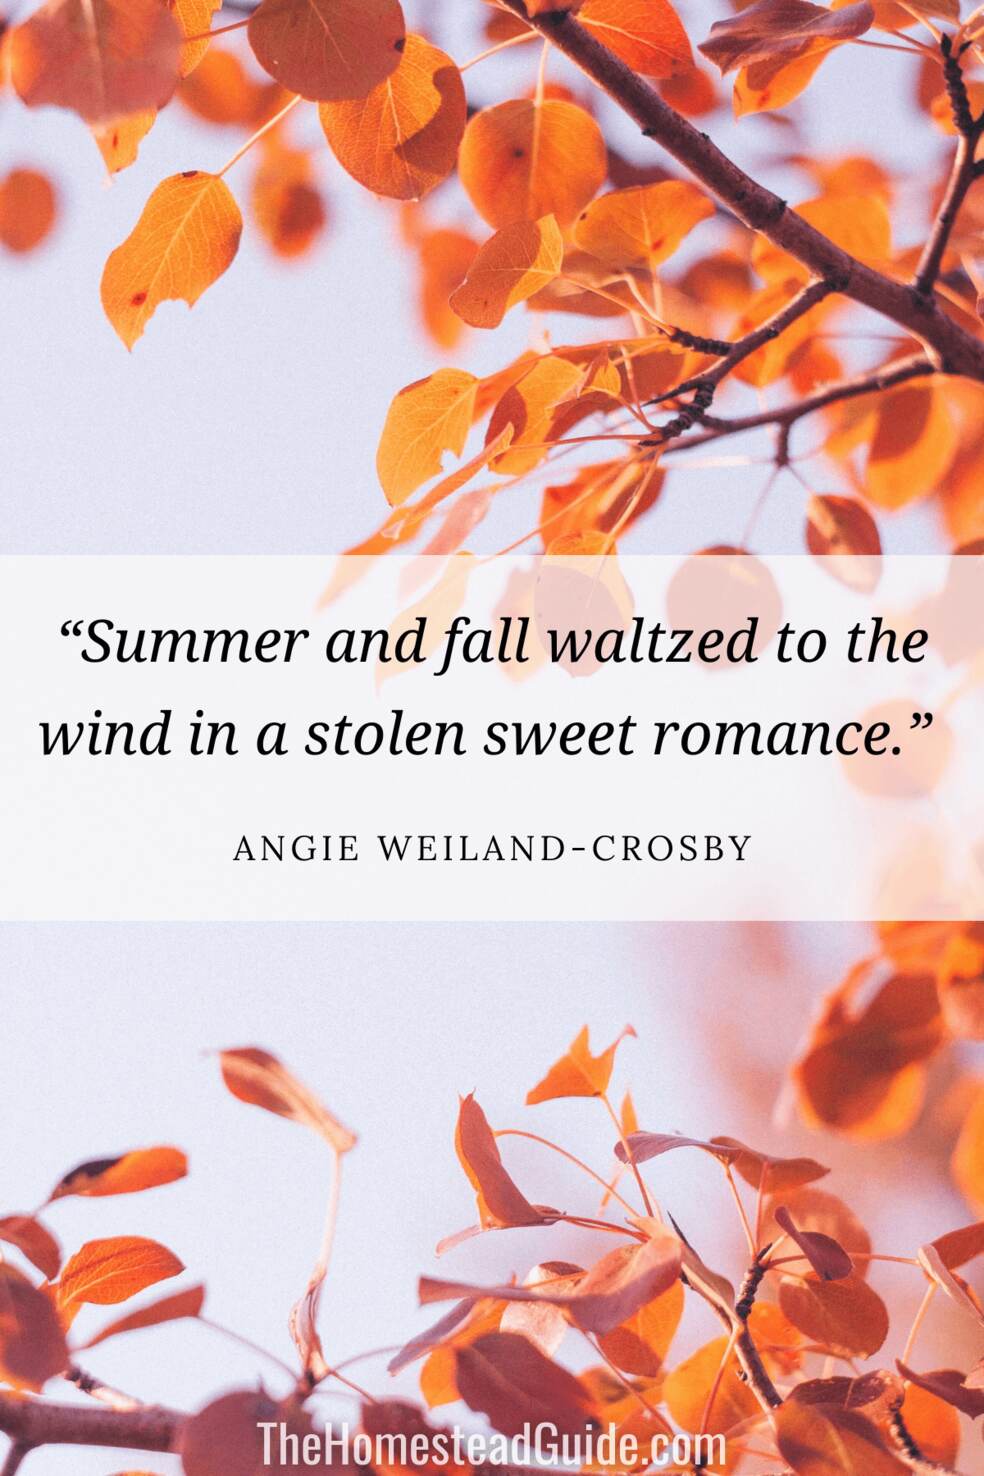 Summer and fall waltzed to the wind in a stolen sweet romance.